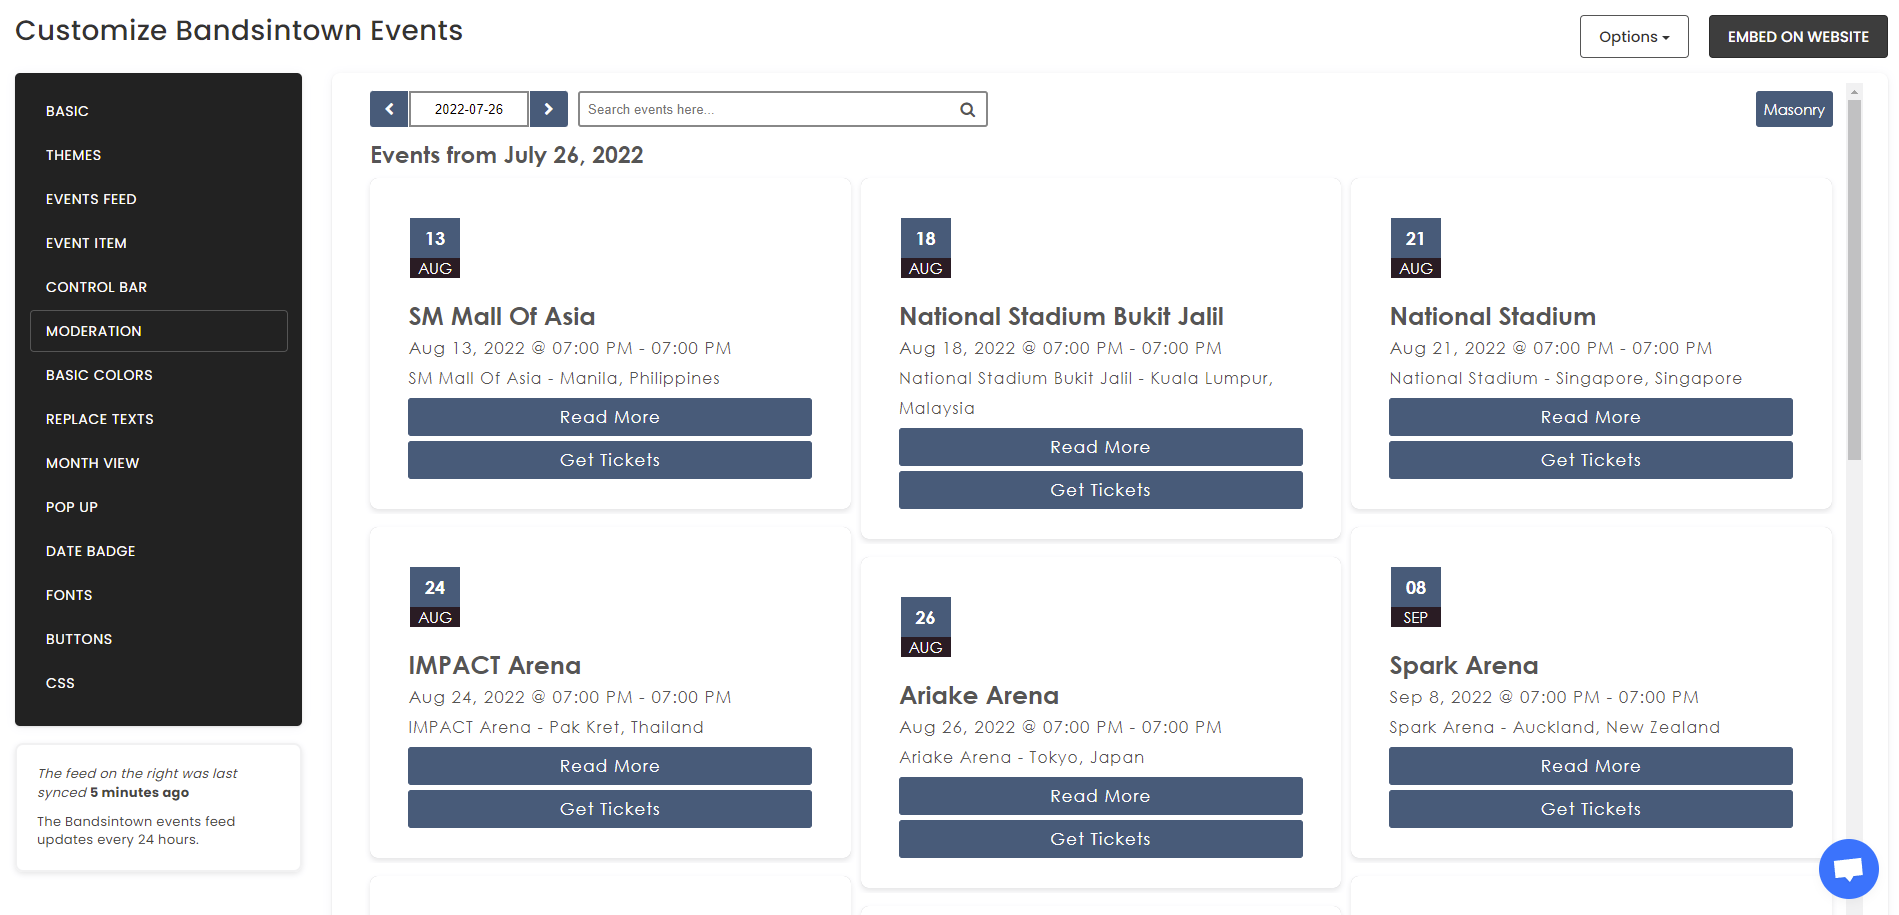 Customize your feed - Free Bandsintown Events Widget For Wix Website